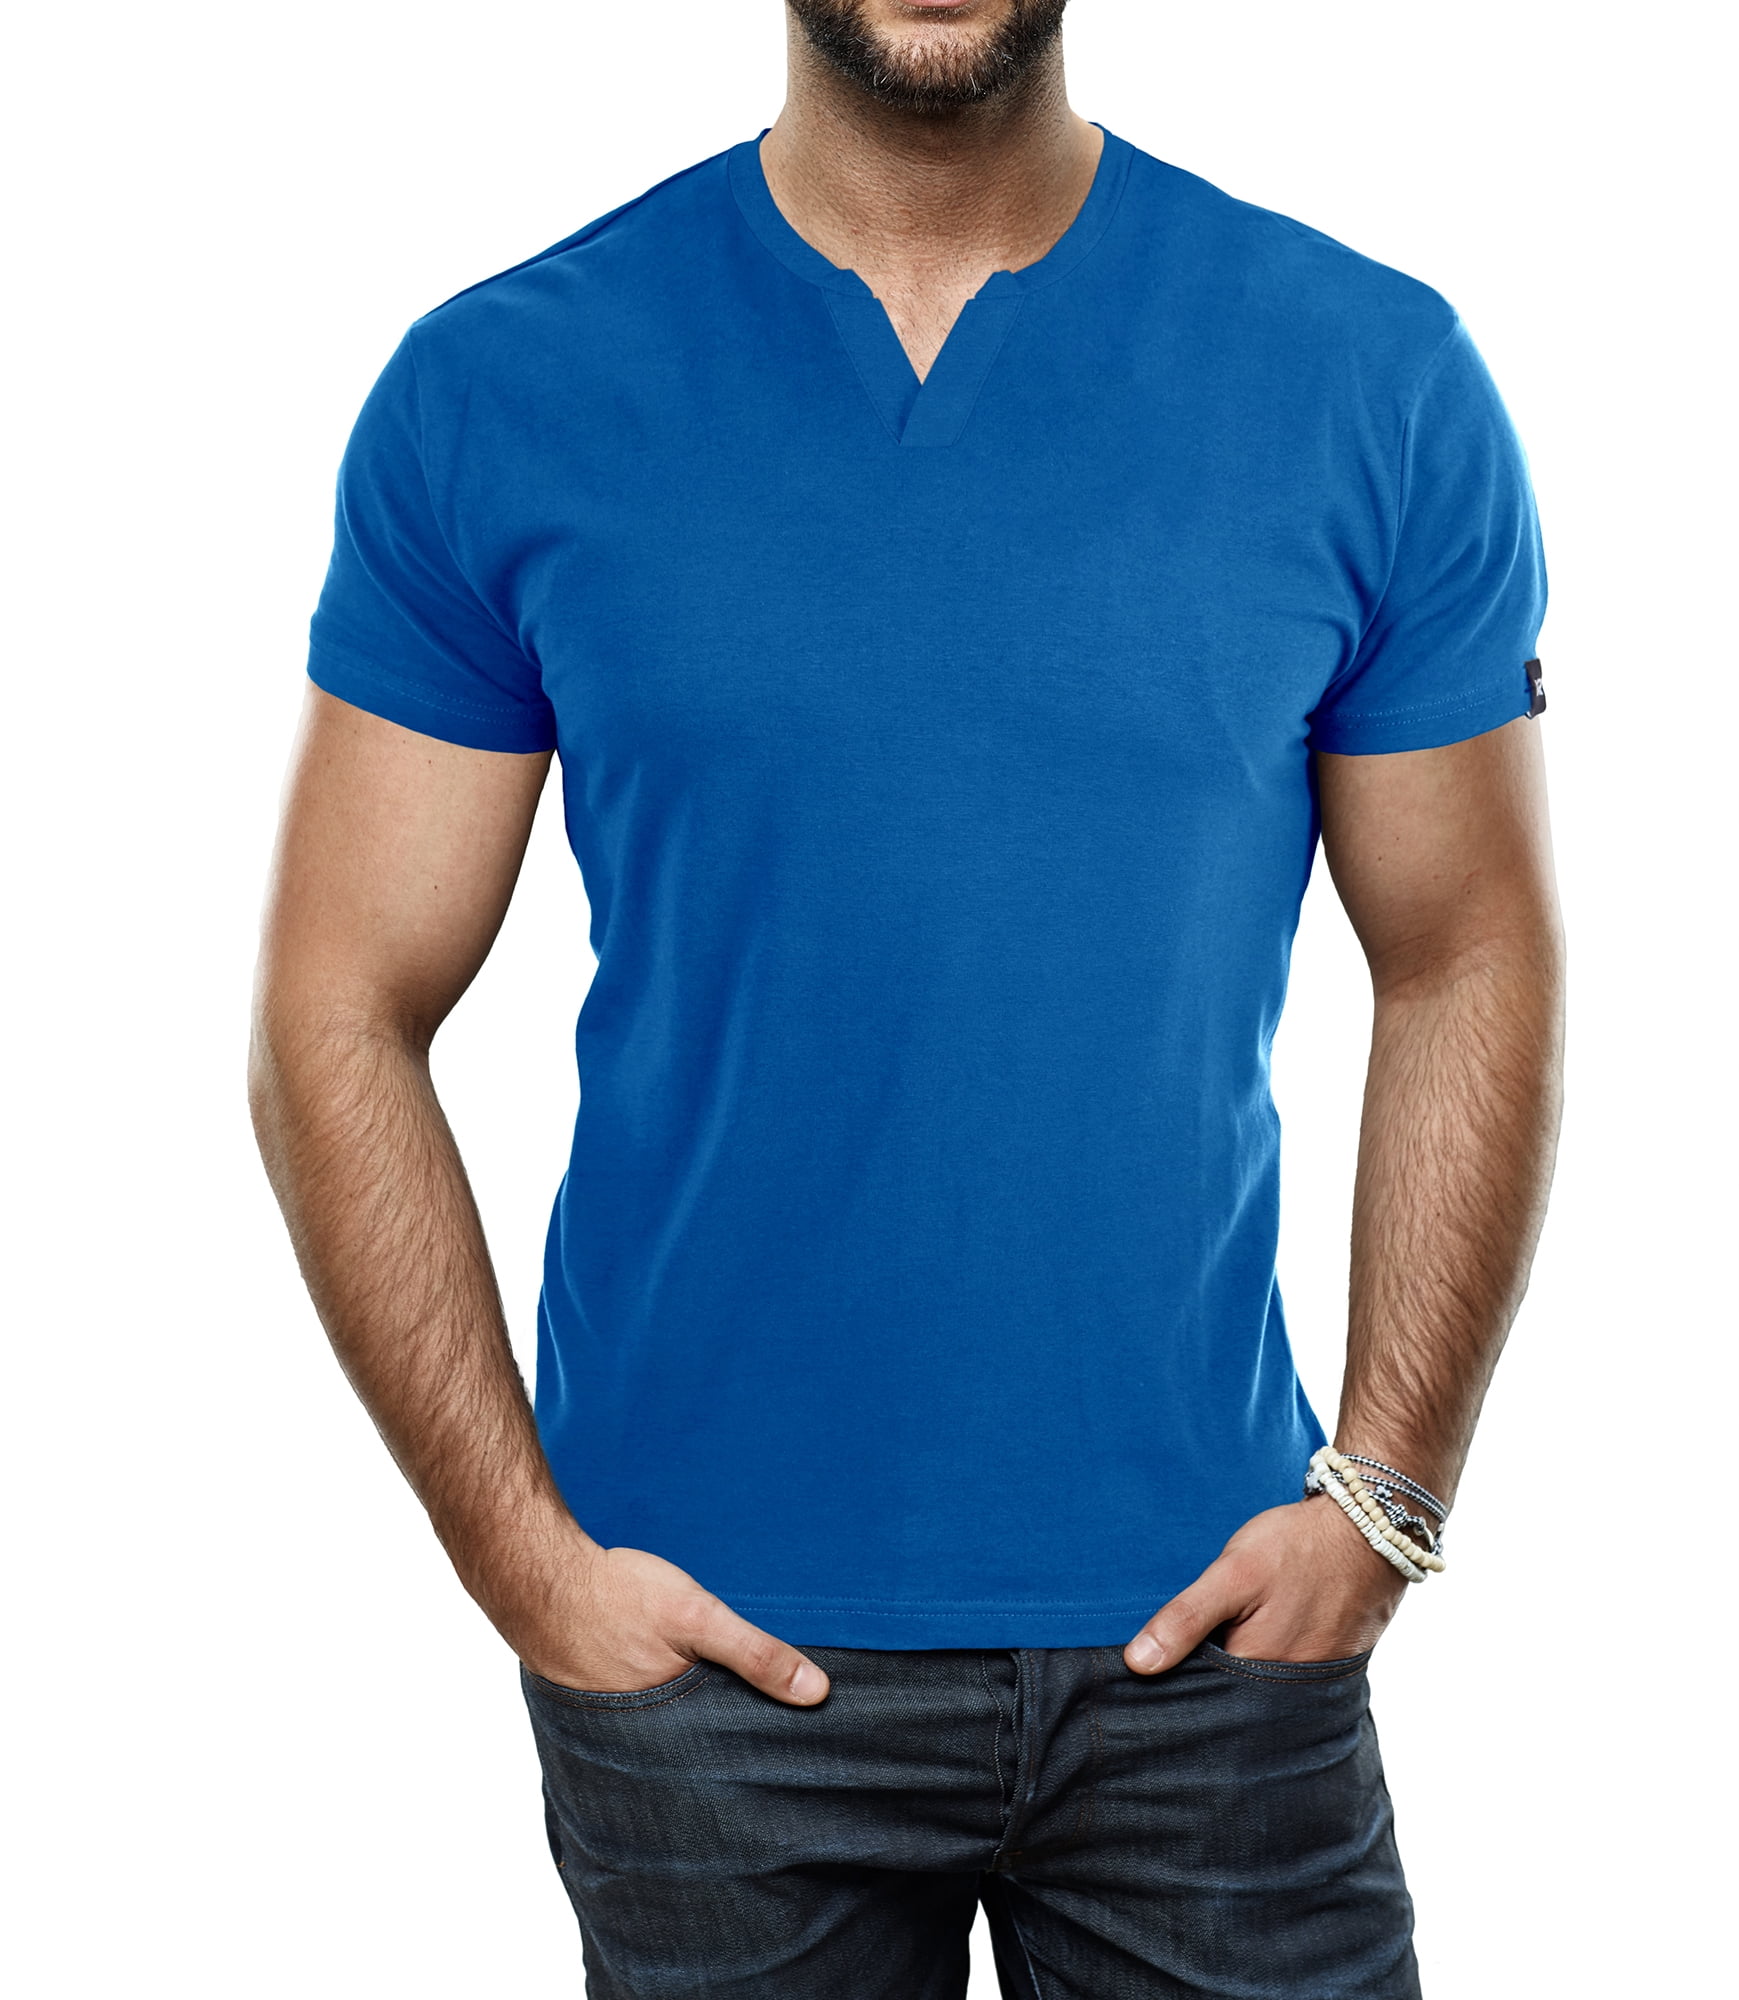 Fashion Casual Tee for Men X RAY Men's Soft Stretch Cotton Solid Short Sleeve V-Neck Slim Fit T-Shirt 